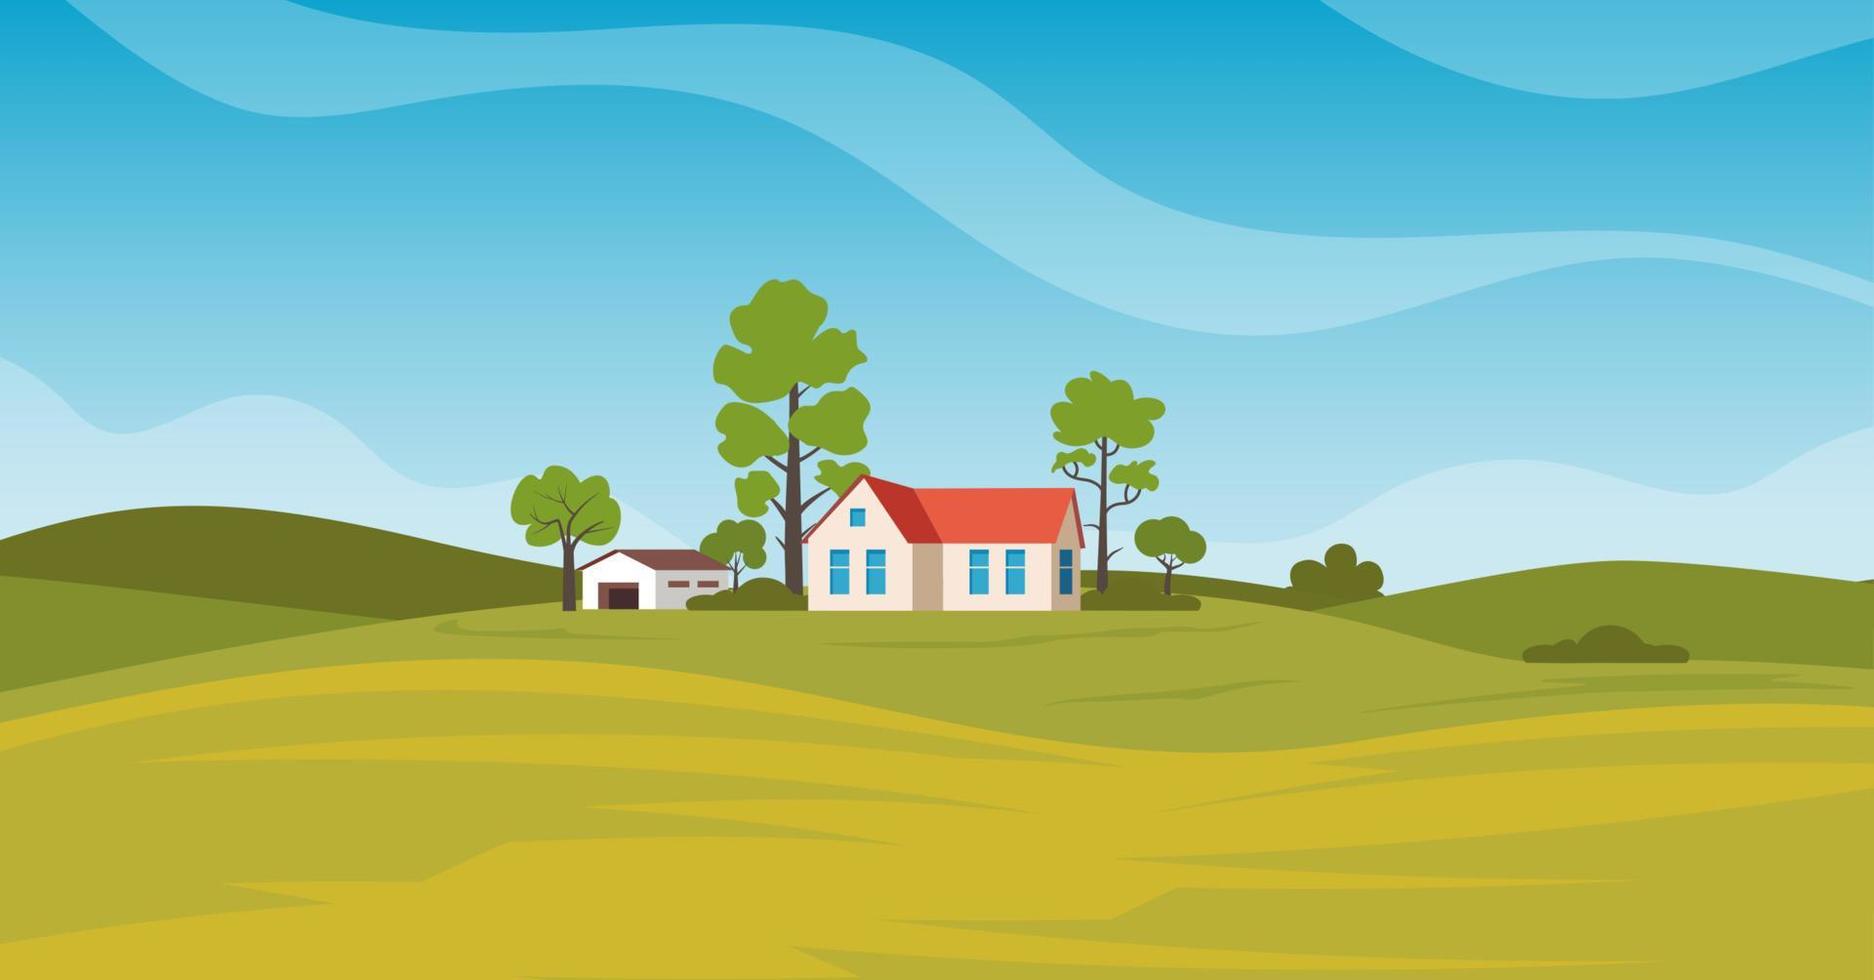 Rural landscape with beautiful view of distant fields and hills. Rustic private house, barn and trees. Vector illustration.